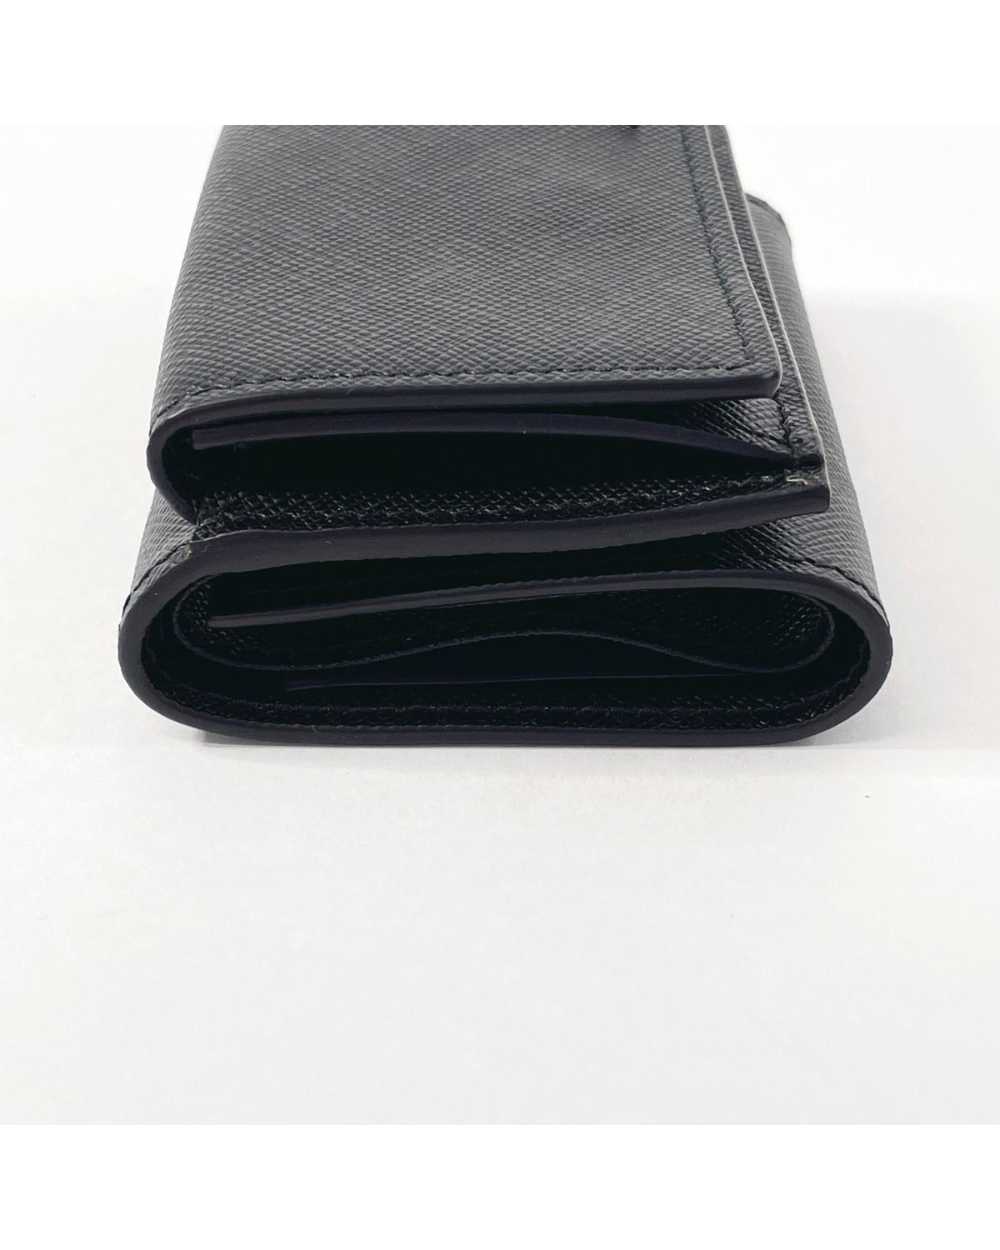 Prada Black Leather Trifold Wallet with Textured … - image 5